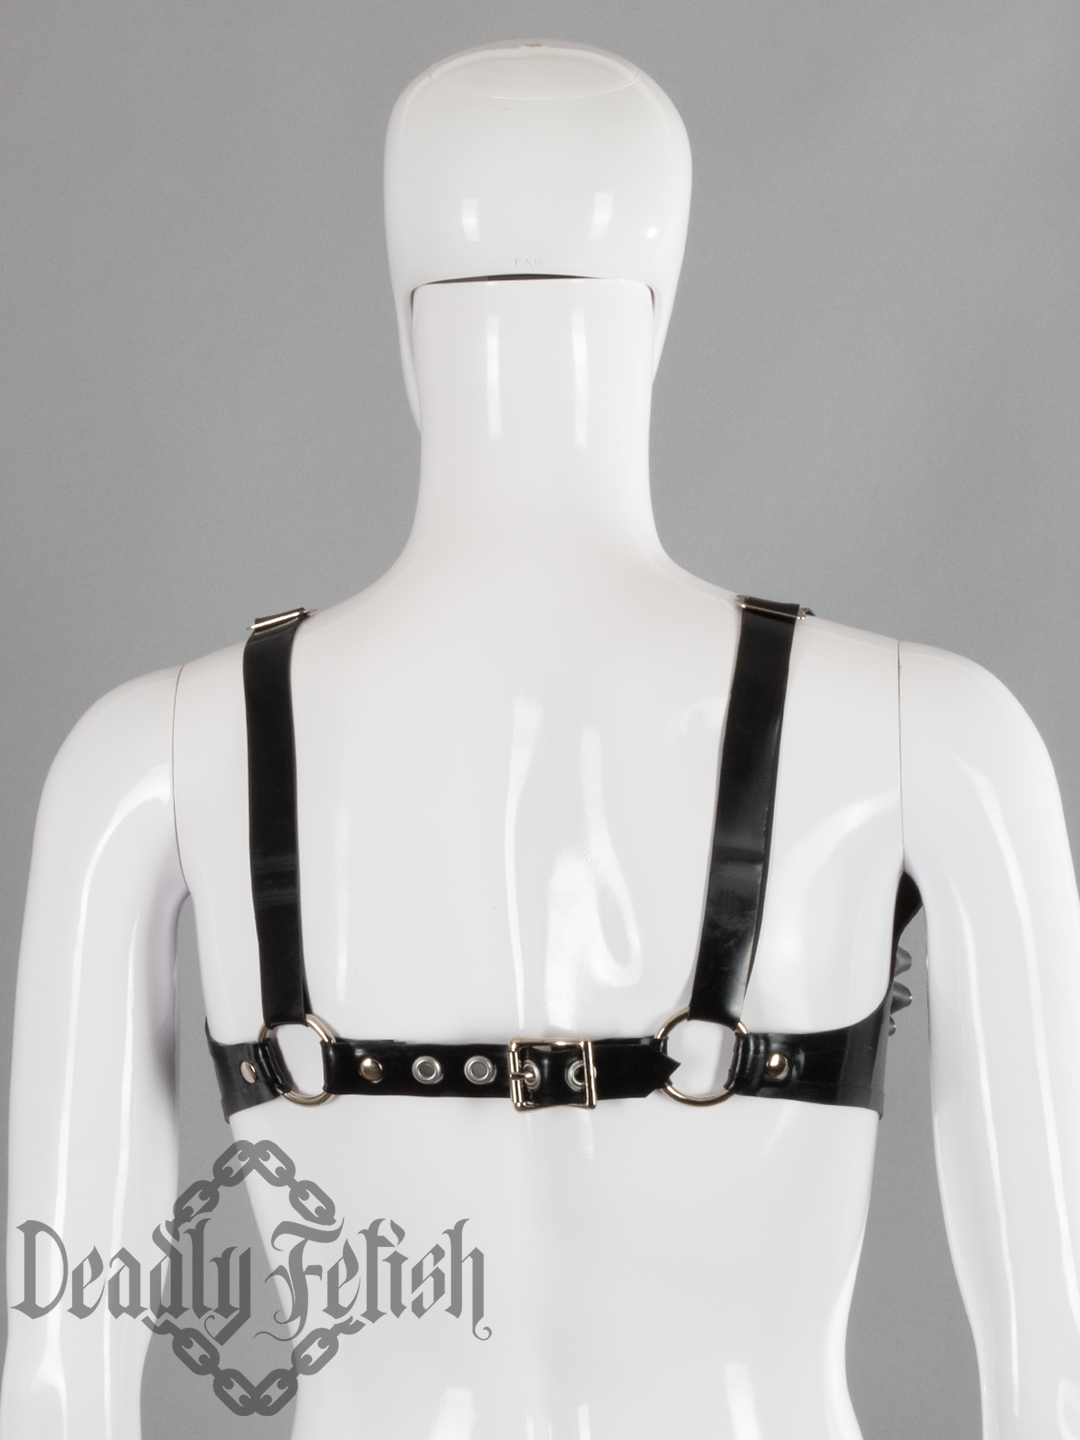 Deadly Fetish Latex: Harness #35